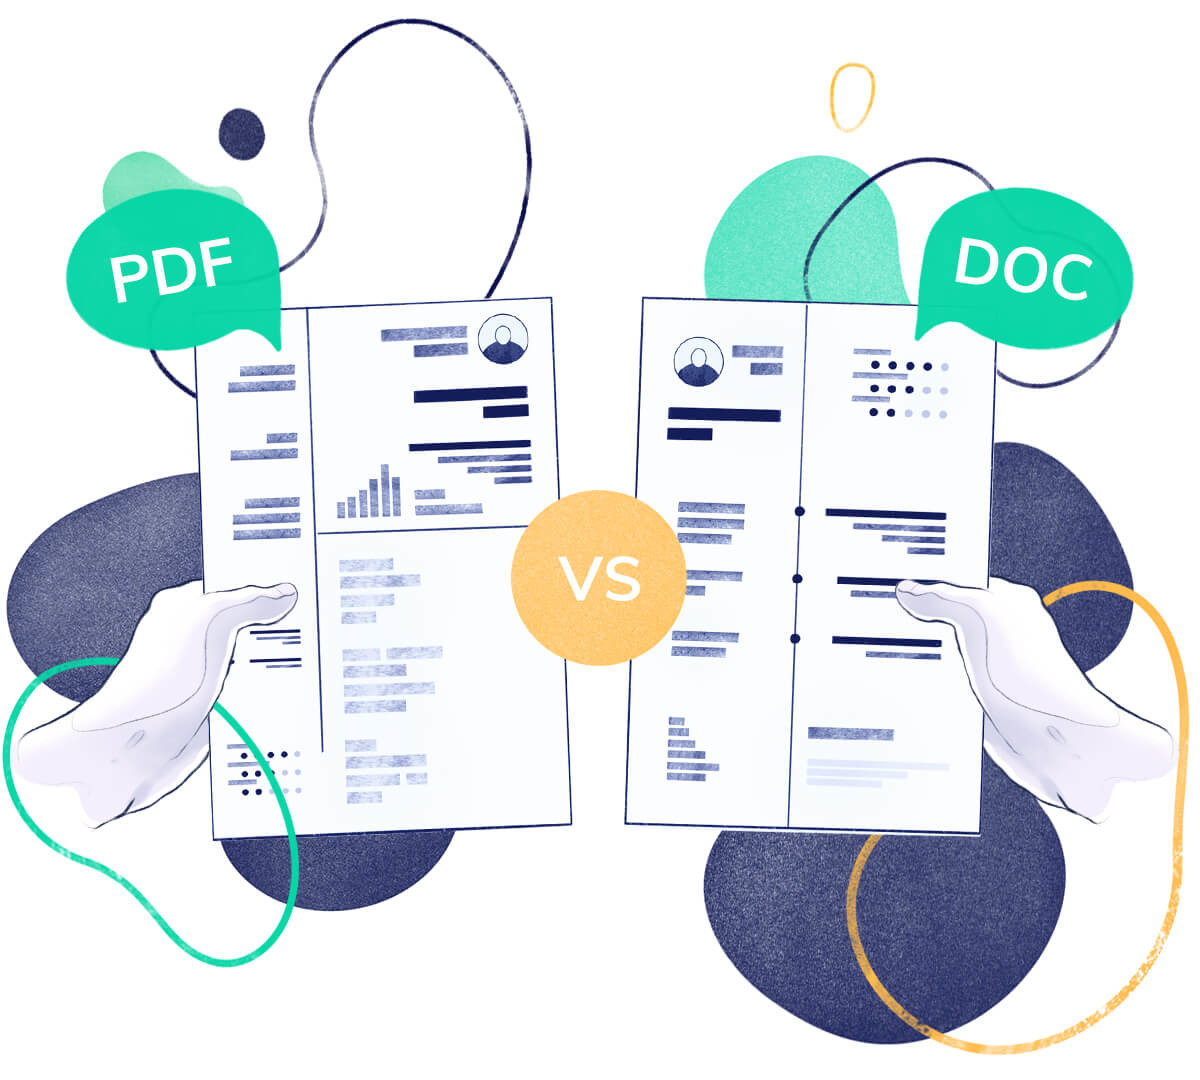 CV: PDF or DOC? Which File Type Works Best